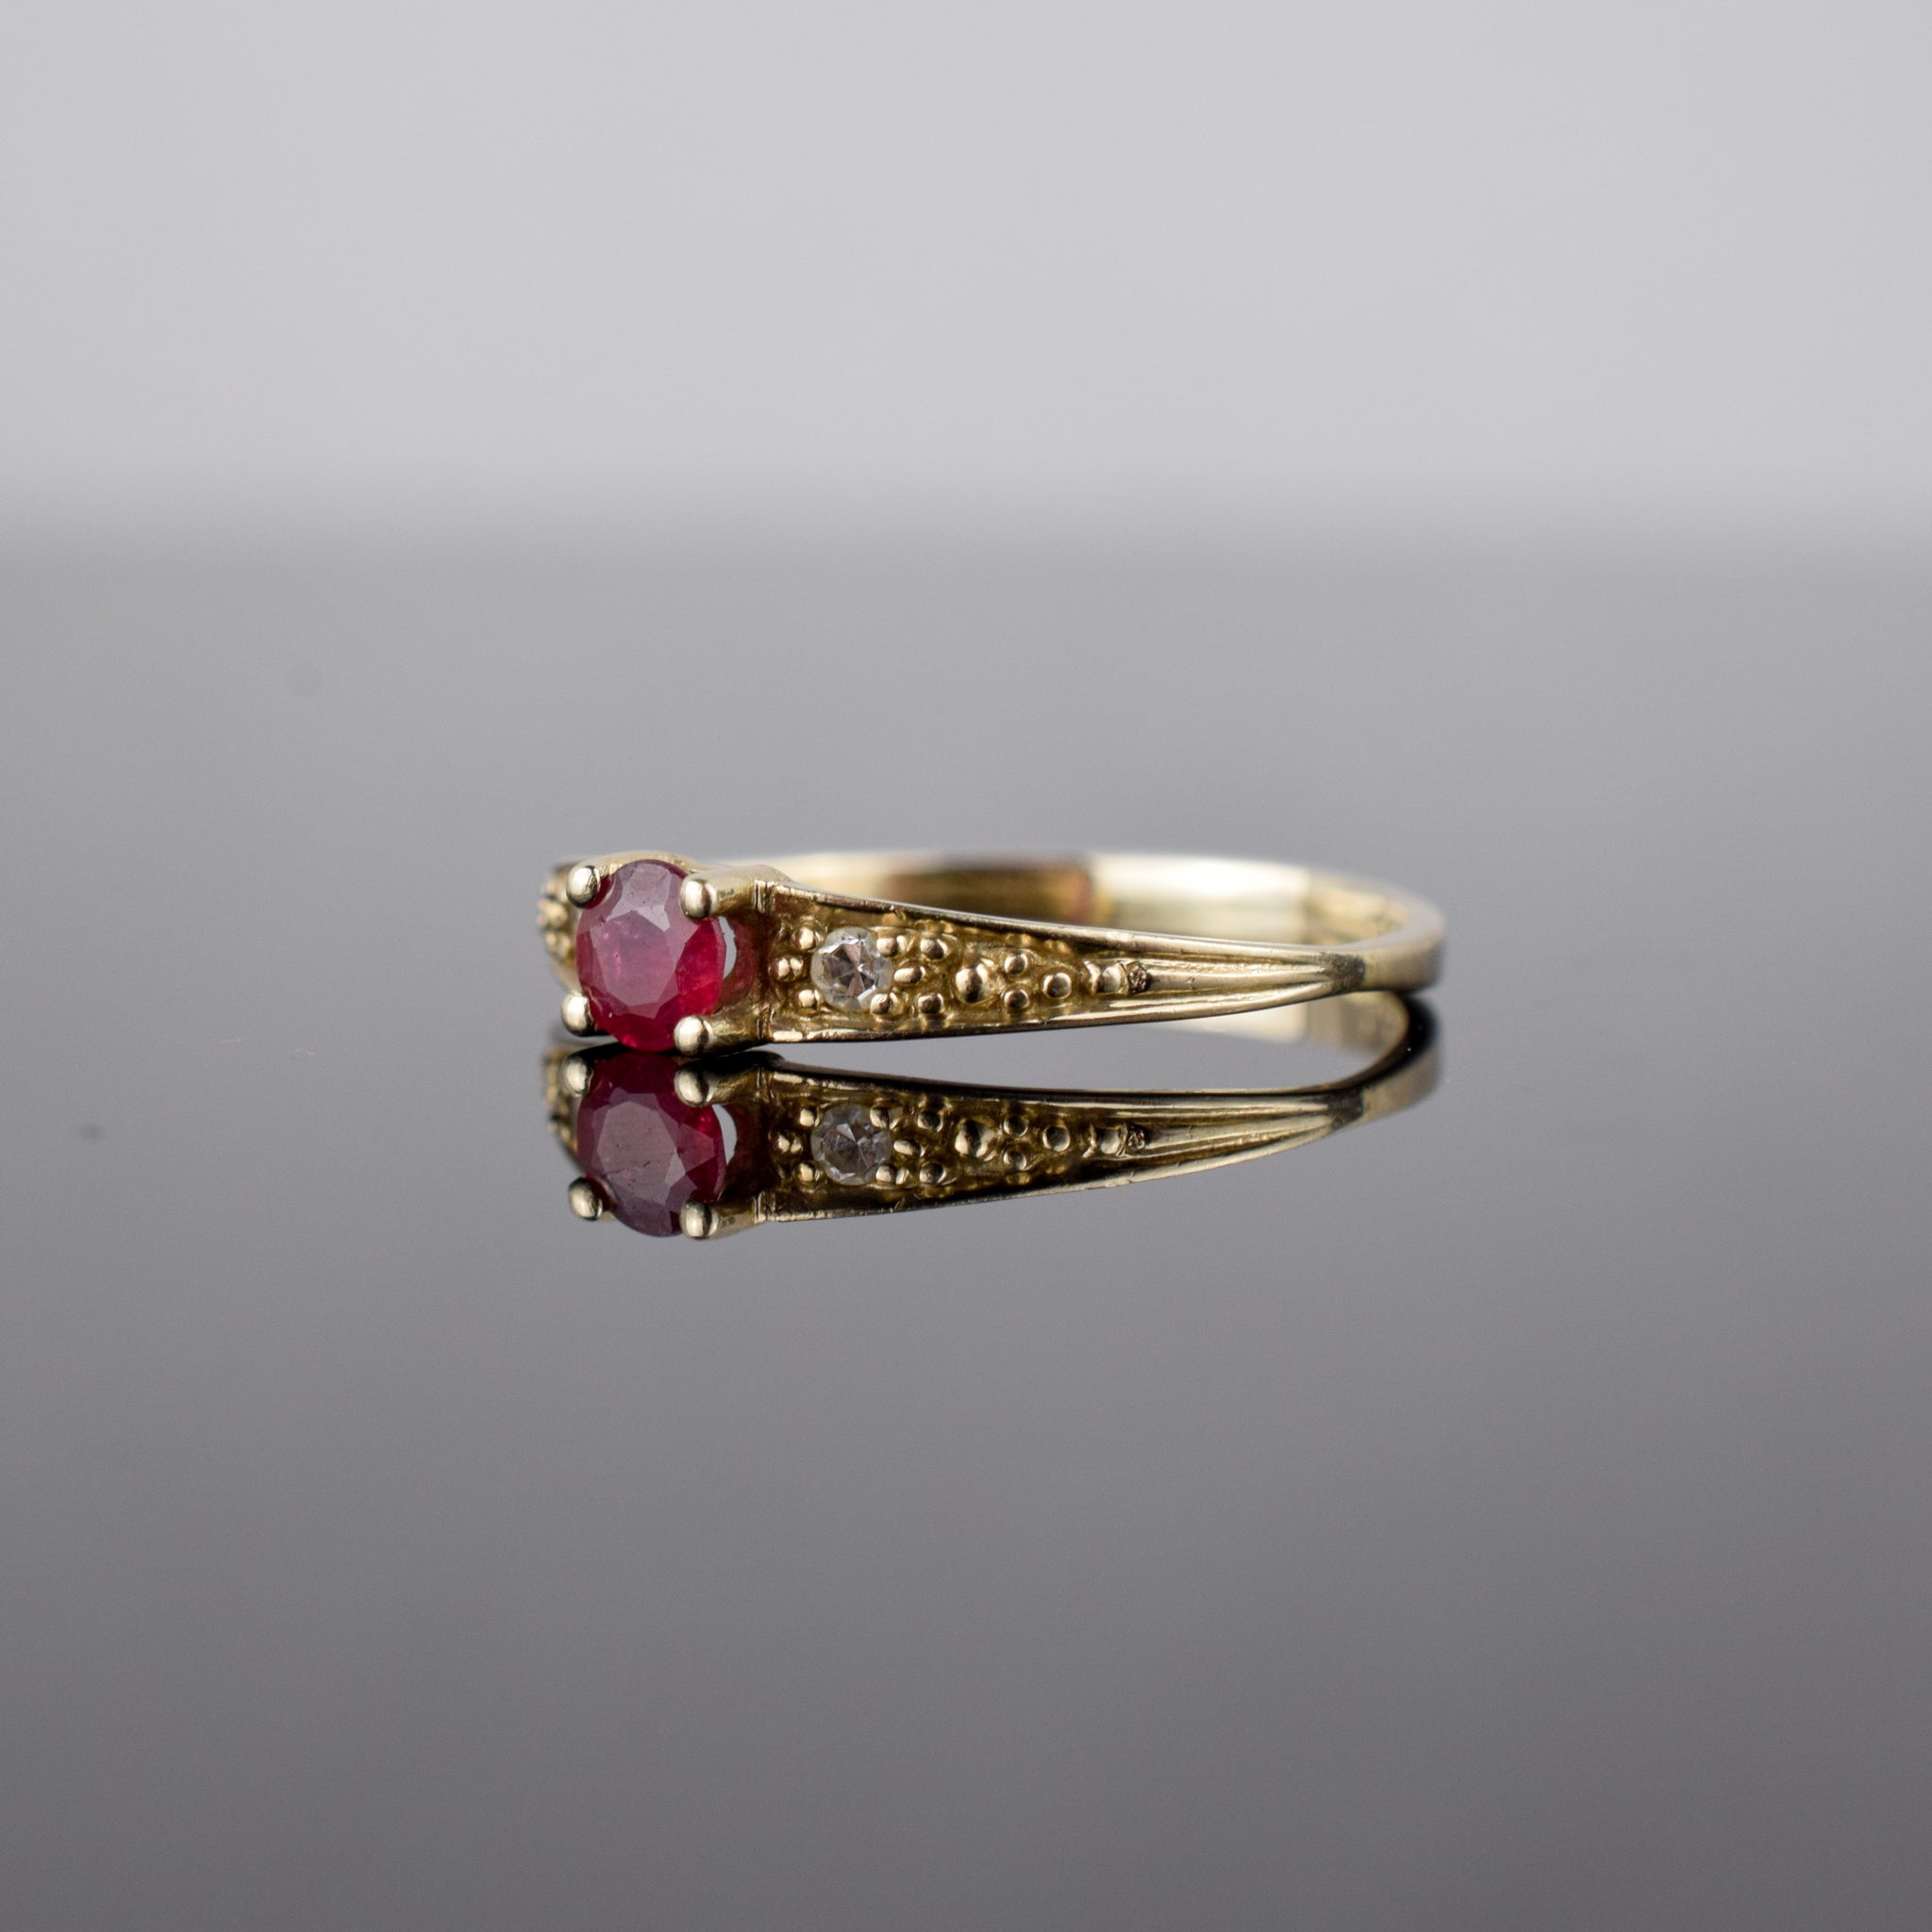 Dainty ruby stacking ring, folklor